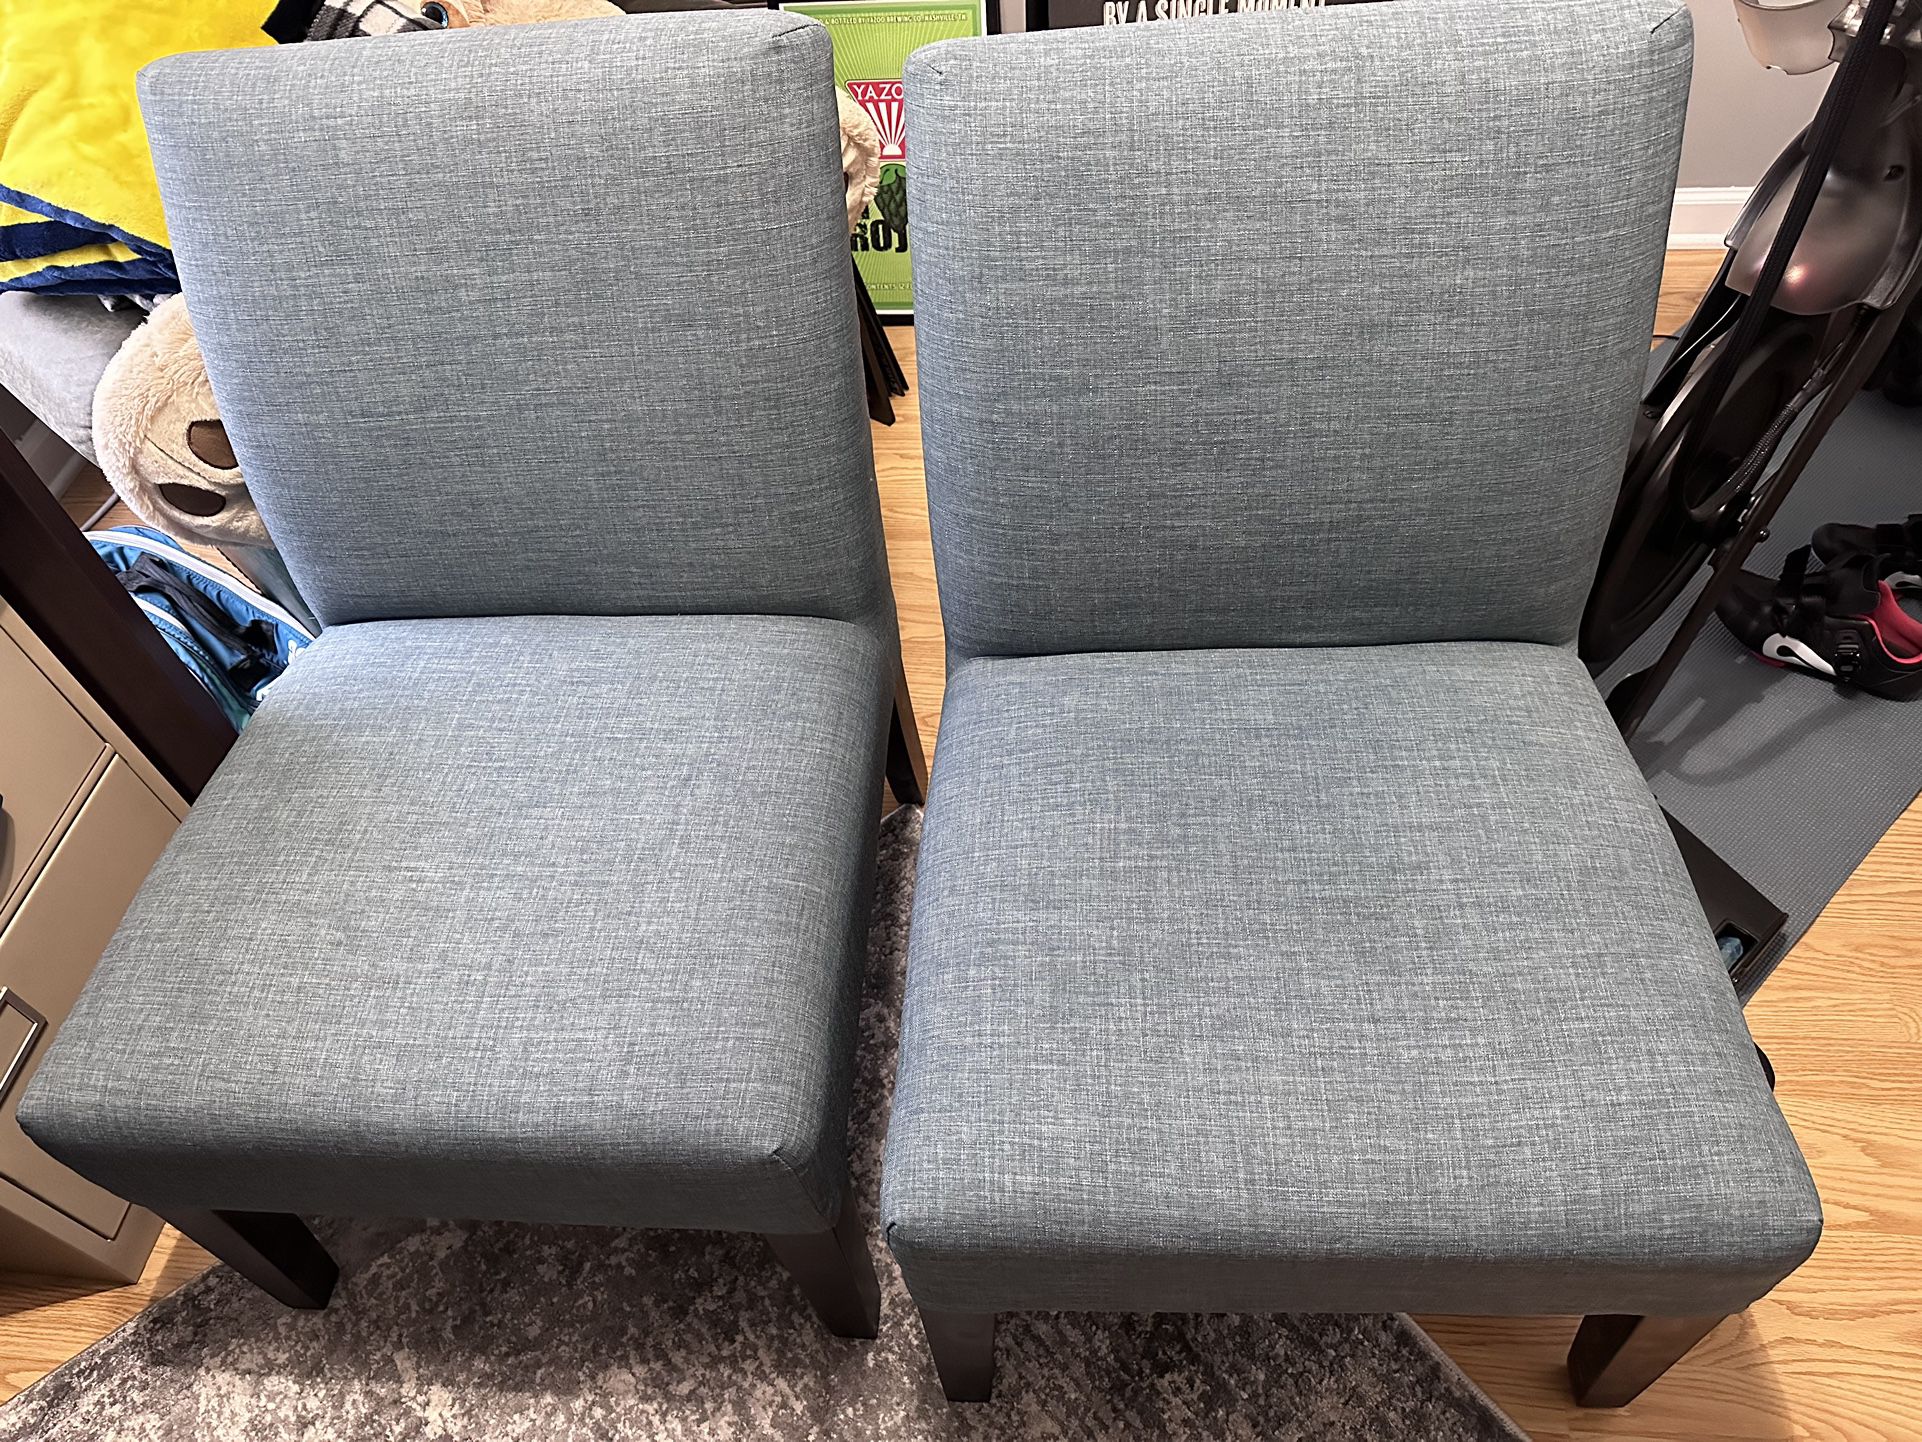 Teal Upholstered Chairs - NEW! 